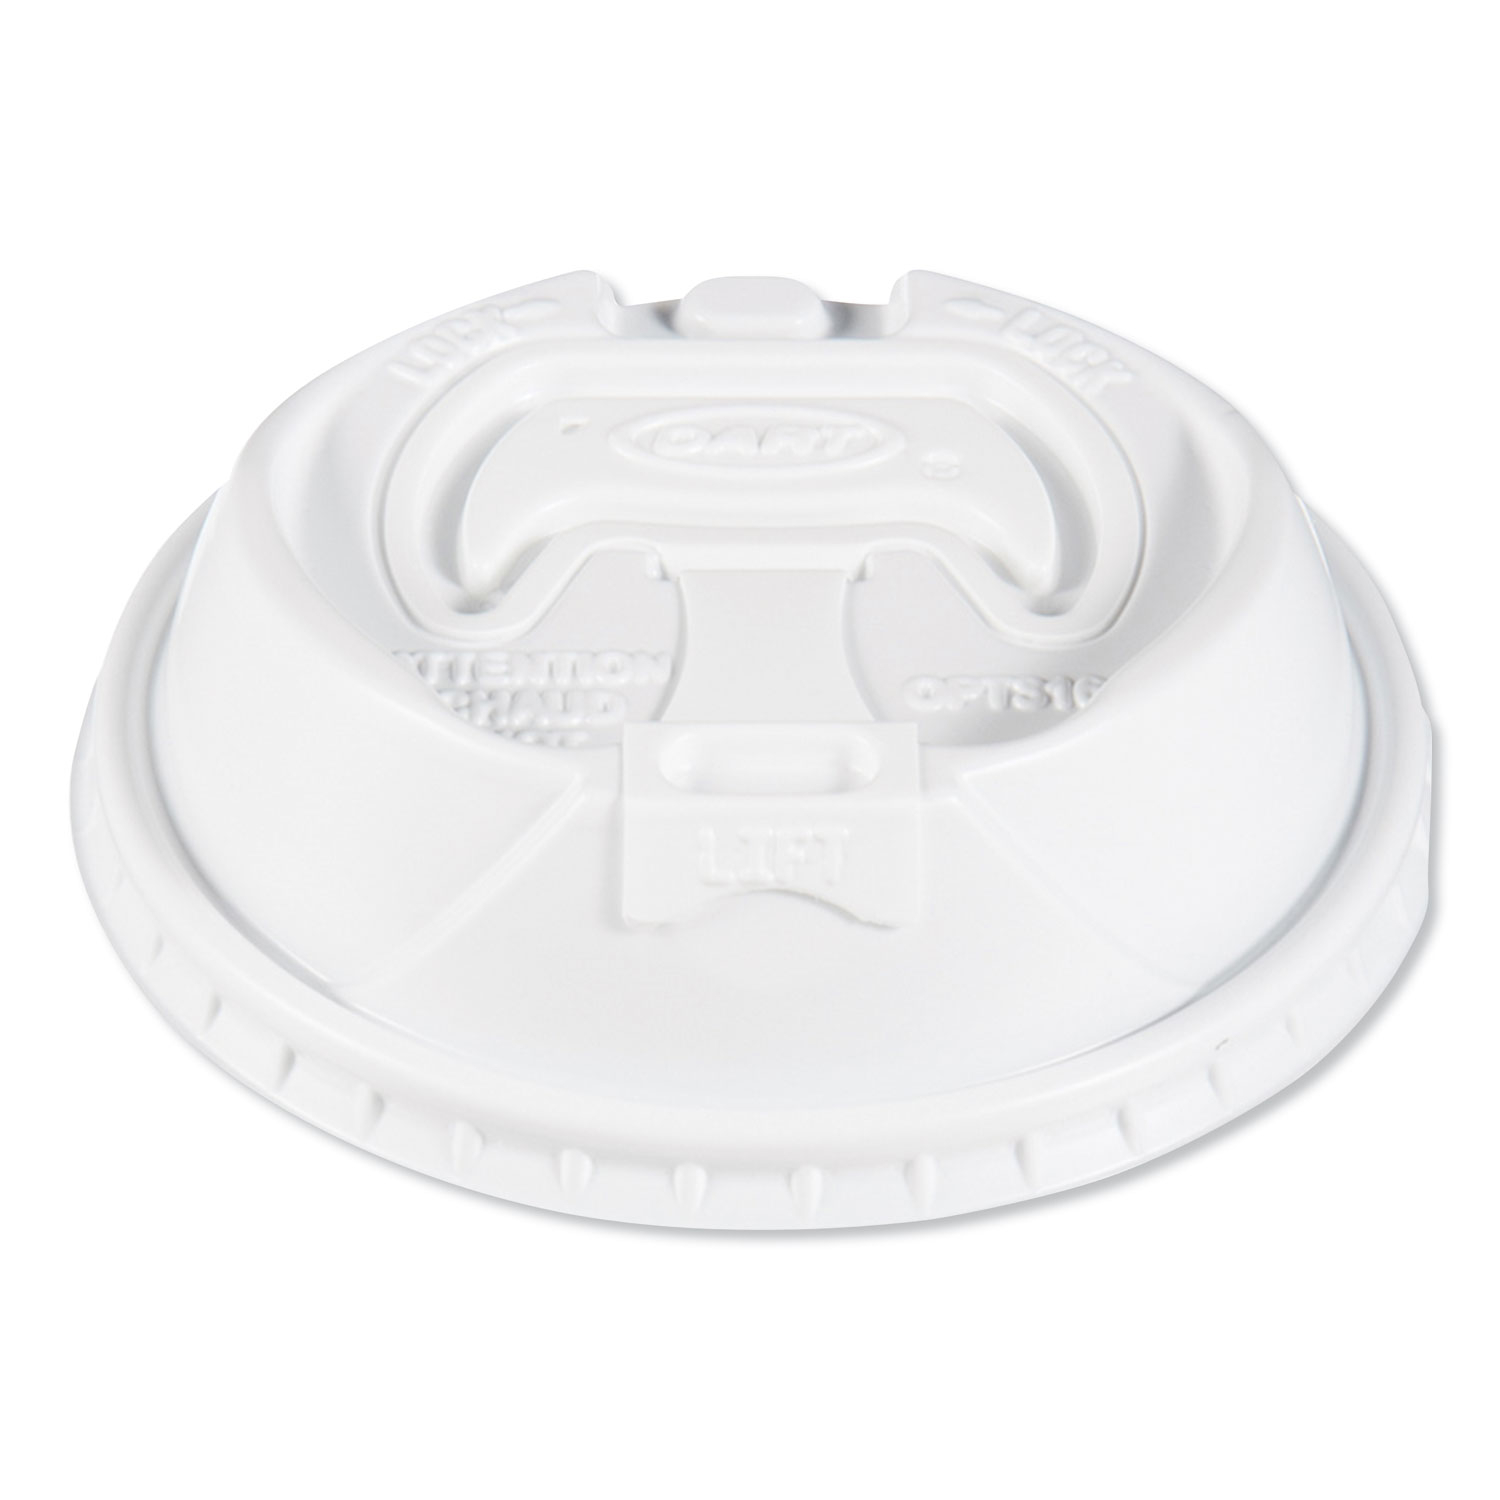  Dart OPT316 Optima Reclosable Lids for Paper Hot Cups for 10-24 oz Cups, White, 1000/Carton (SCCOPT316) 